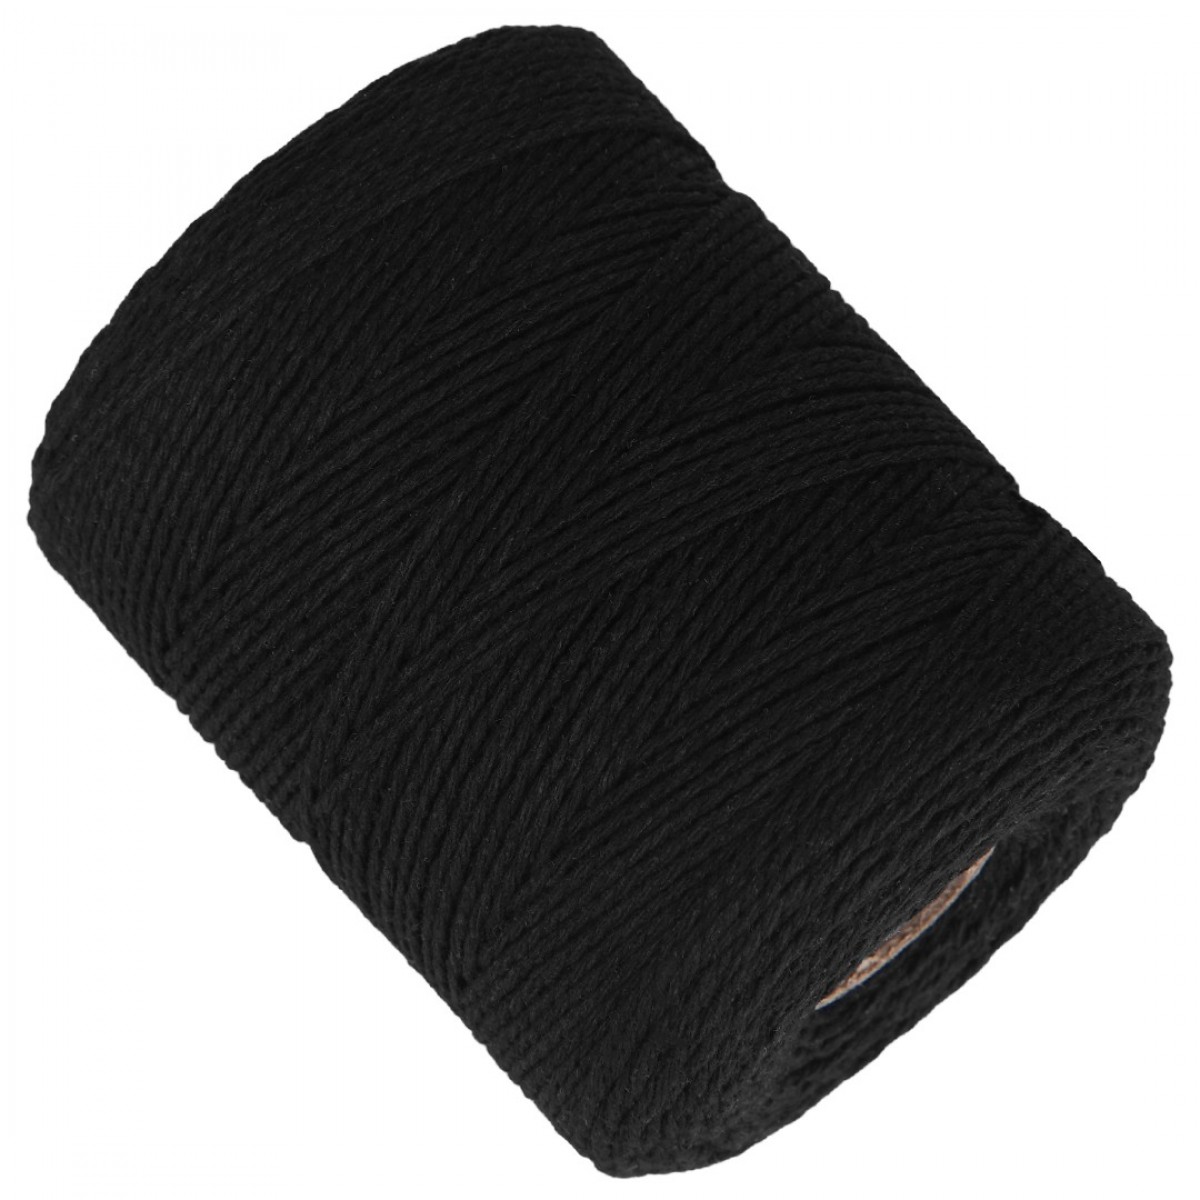 Natural Cotton Black Twine String - Ohtomber 984 Feet 2MM Butchers Twine, Twine for Gift Wrapping, G